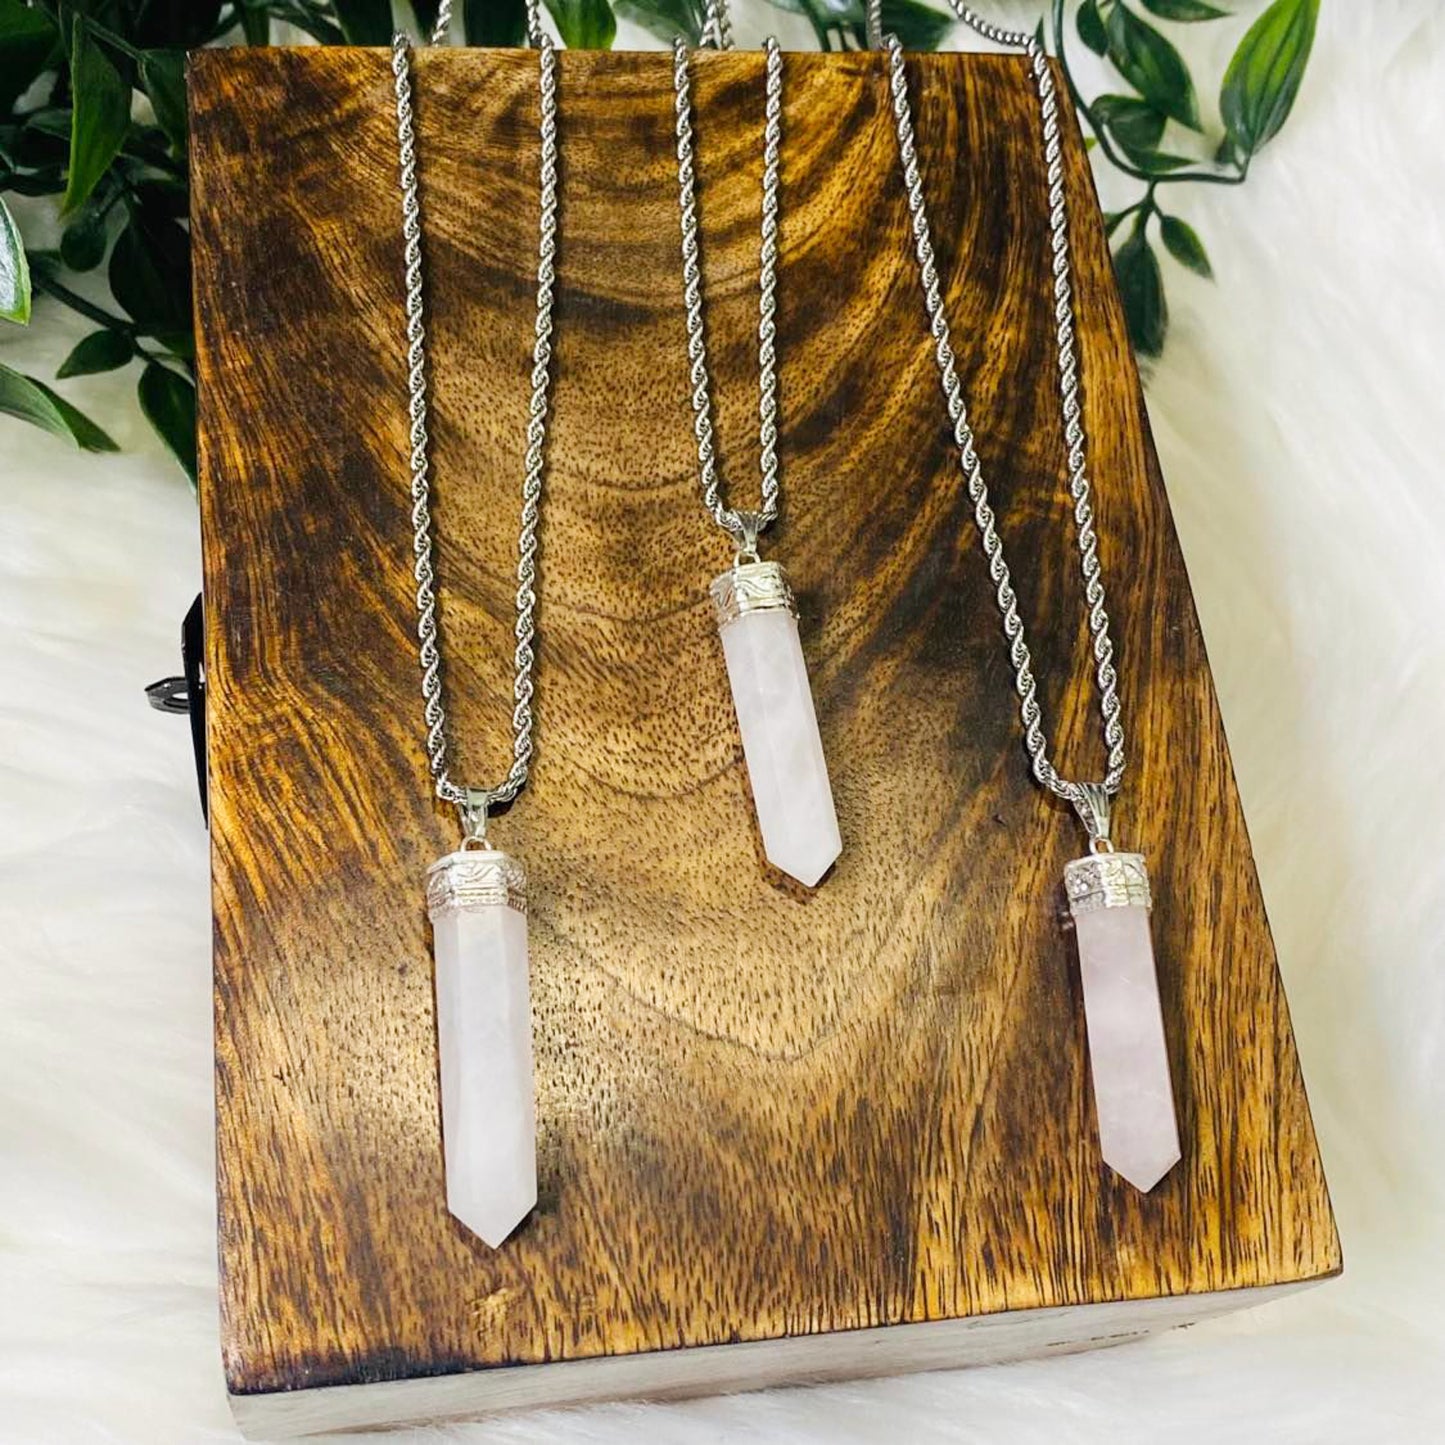 Rose Quartz Pointed Crystal Necklace with Gold Dipped Silver Chain